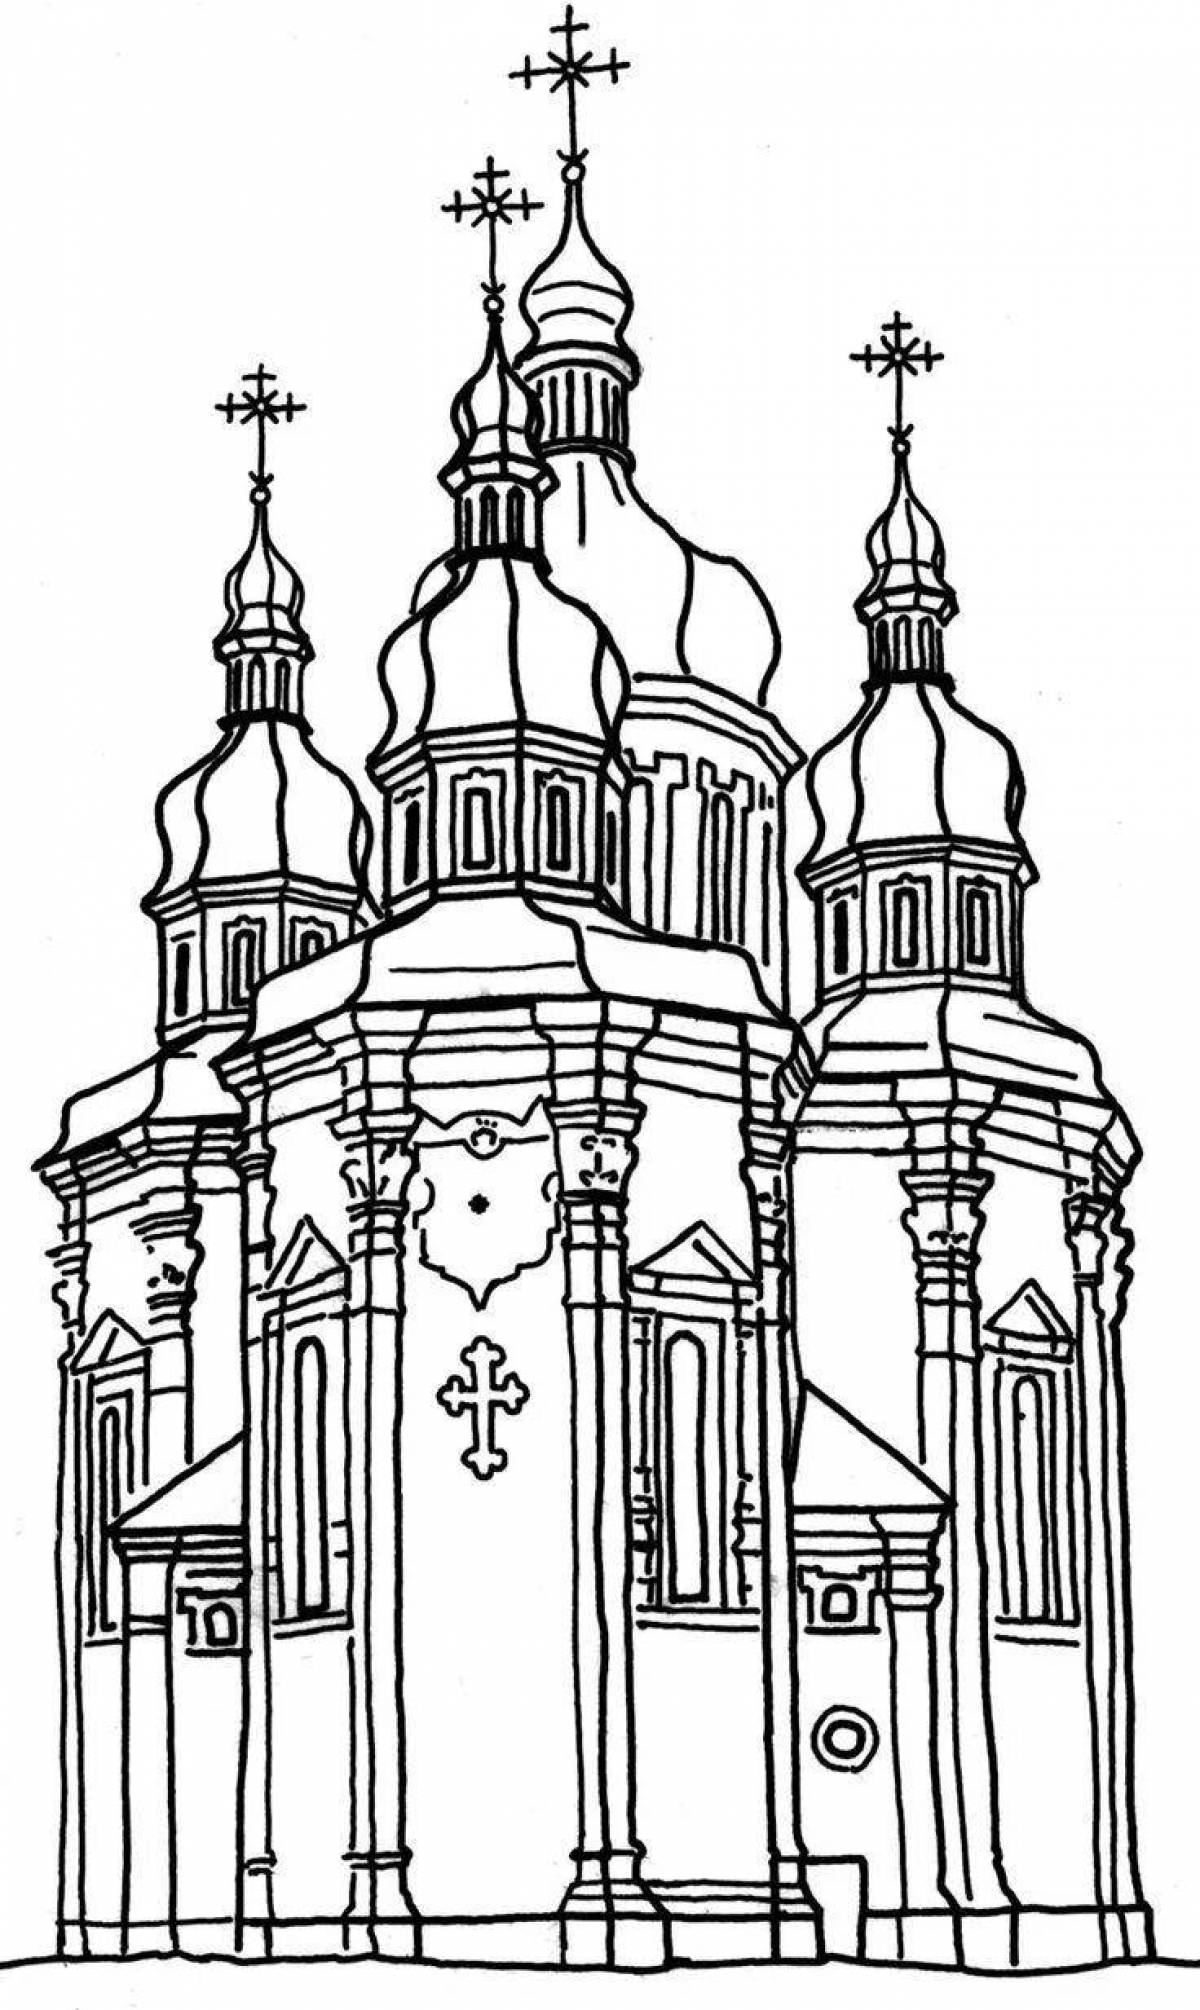 Coloring page monumental church with domes